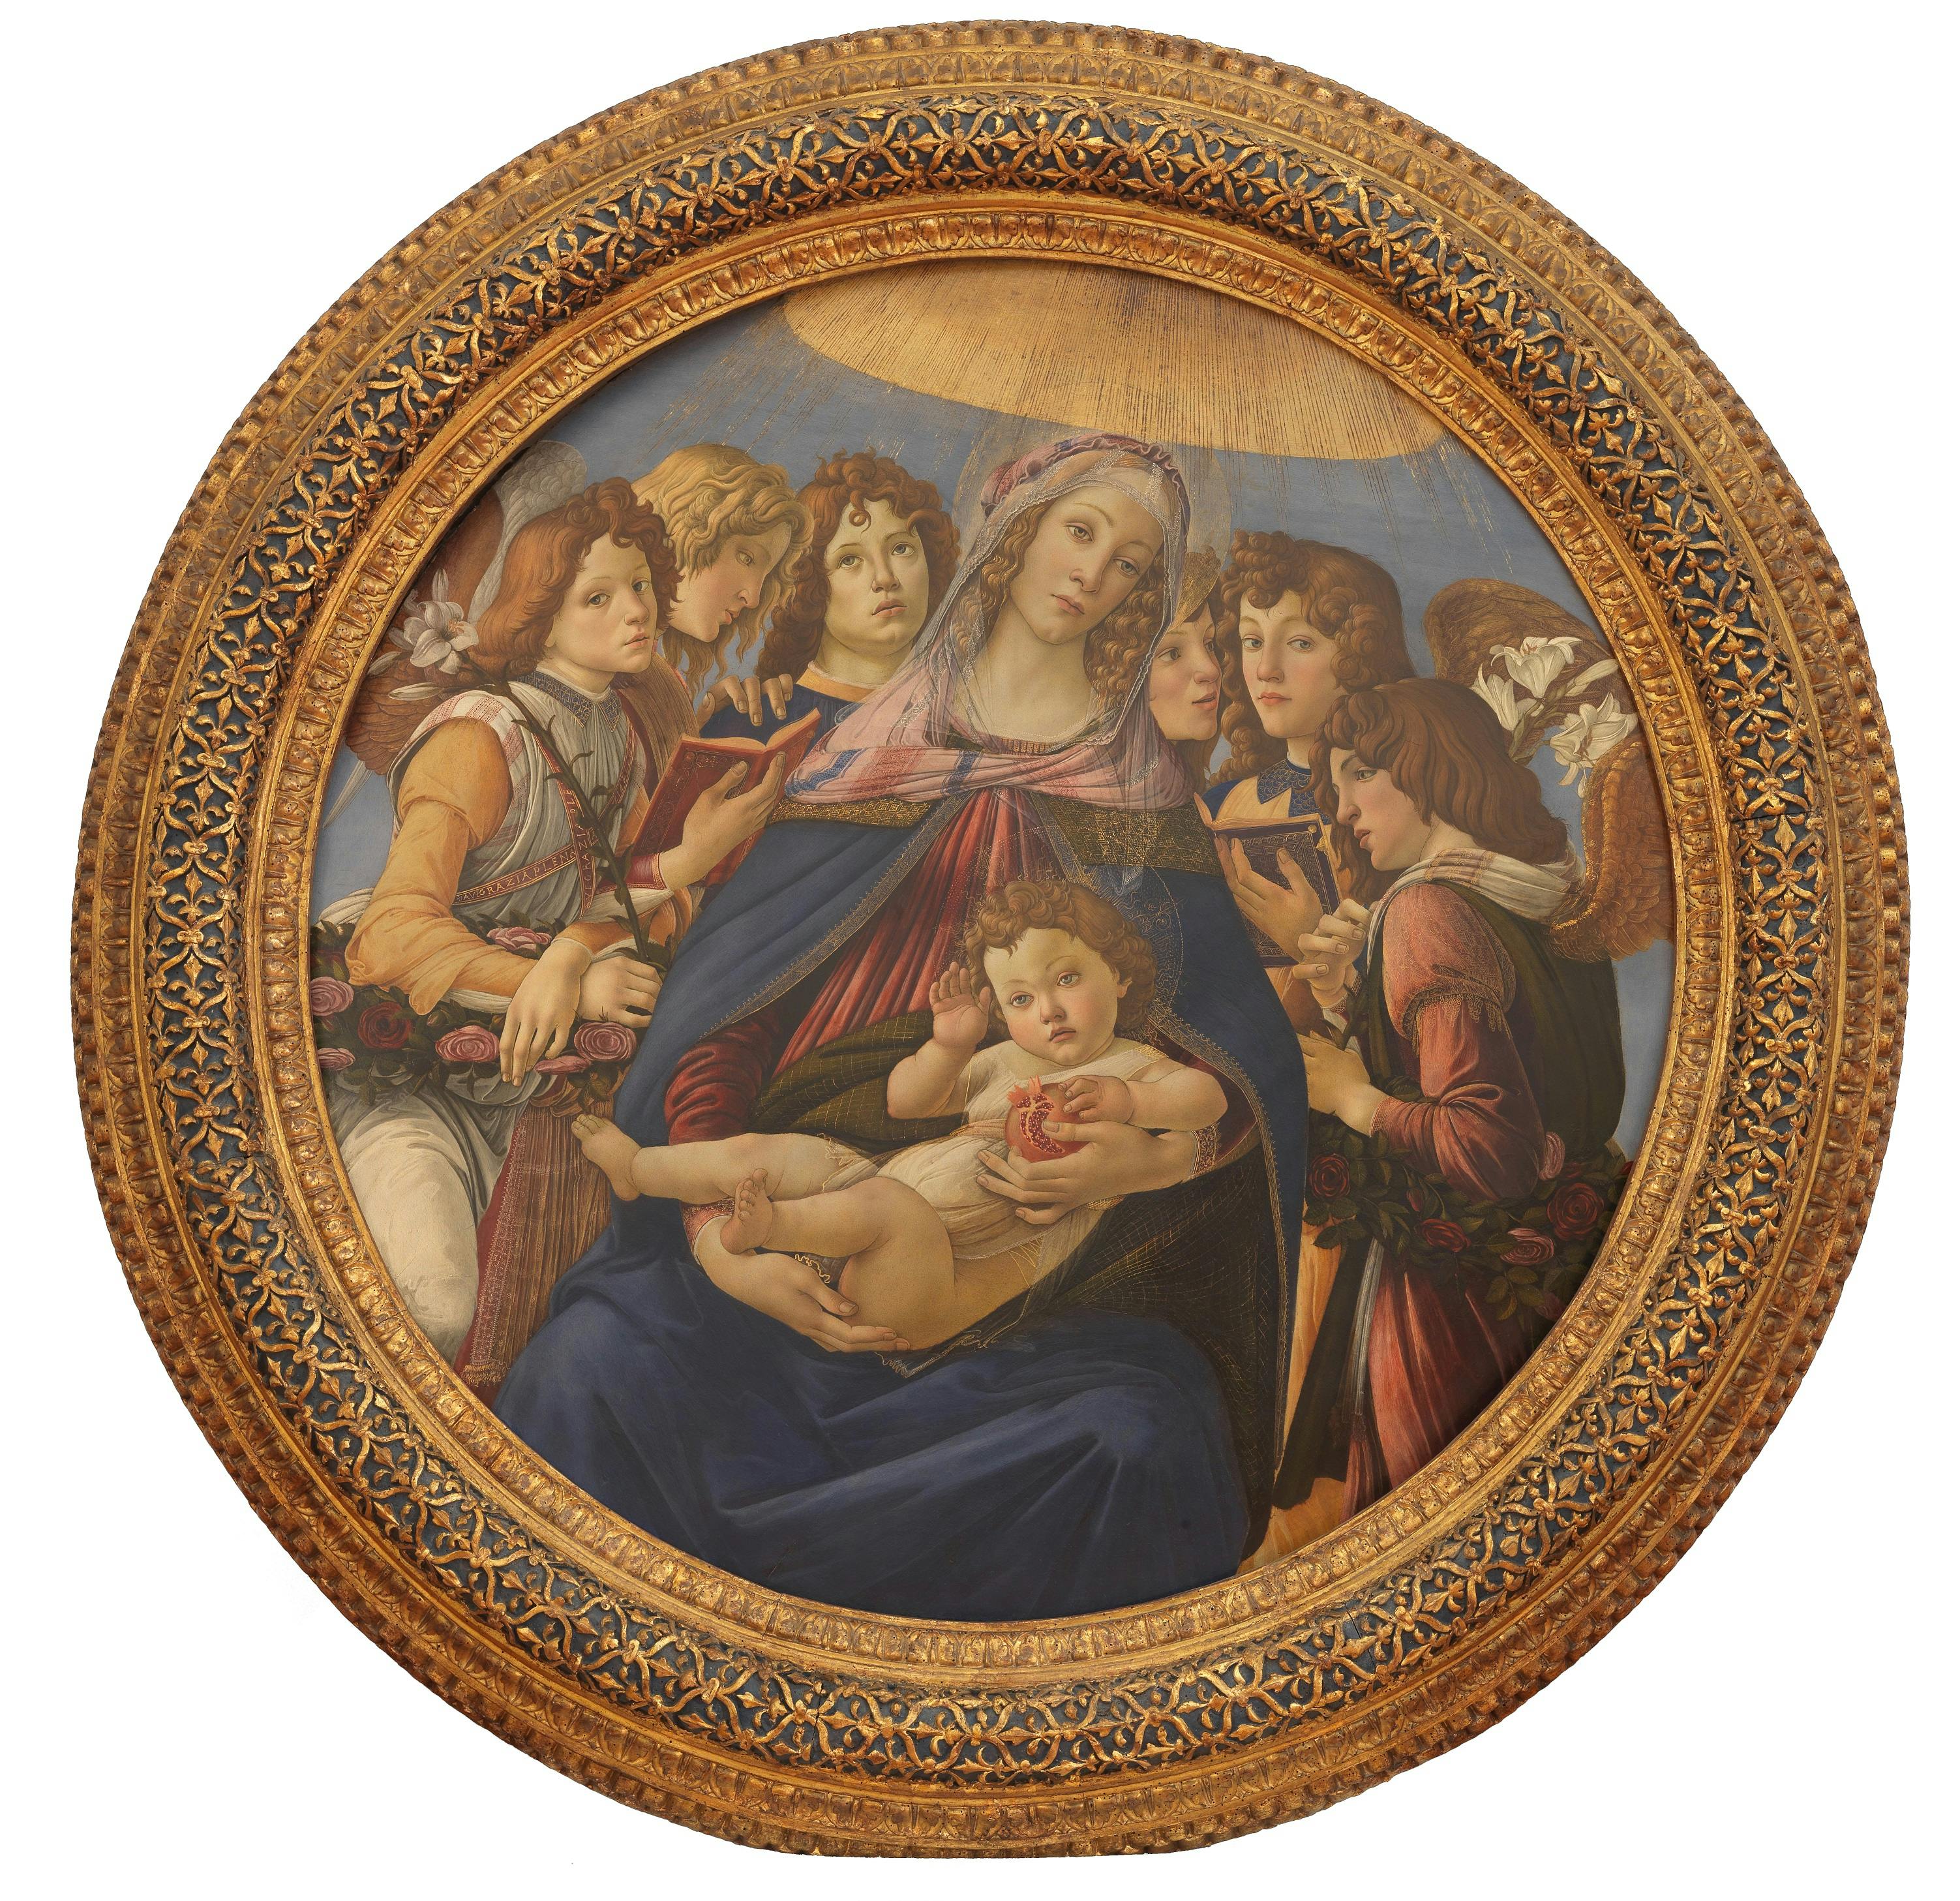 Virgin and Child with Angels ('Madonna of the Pomegranate')